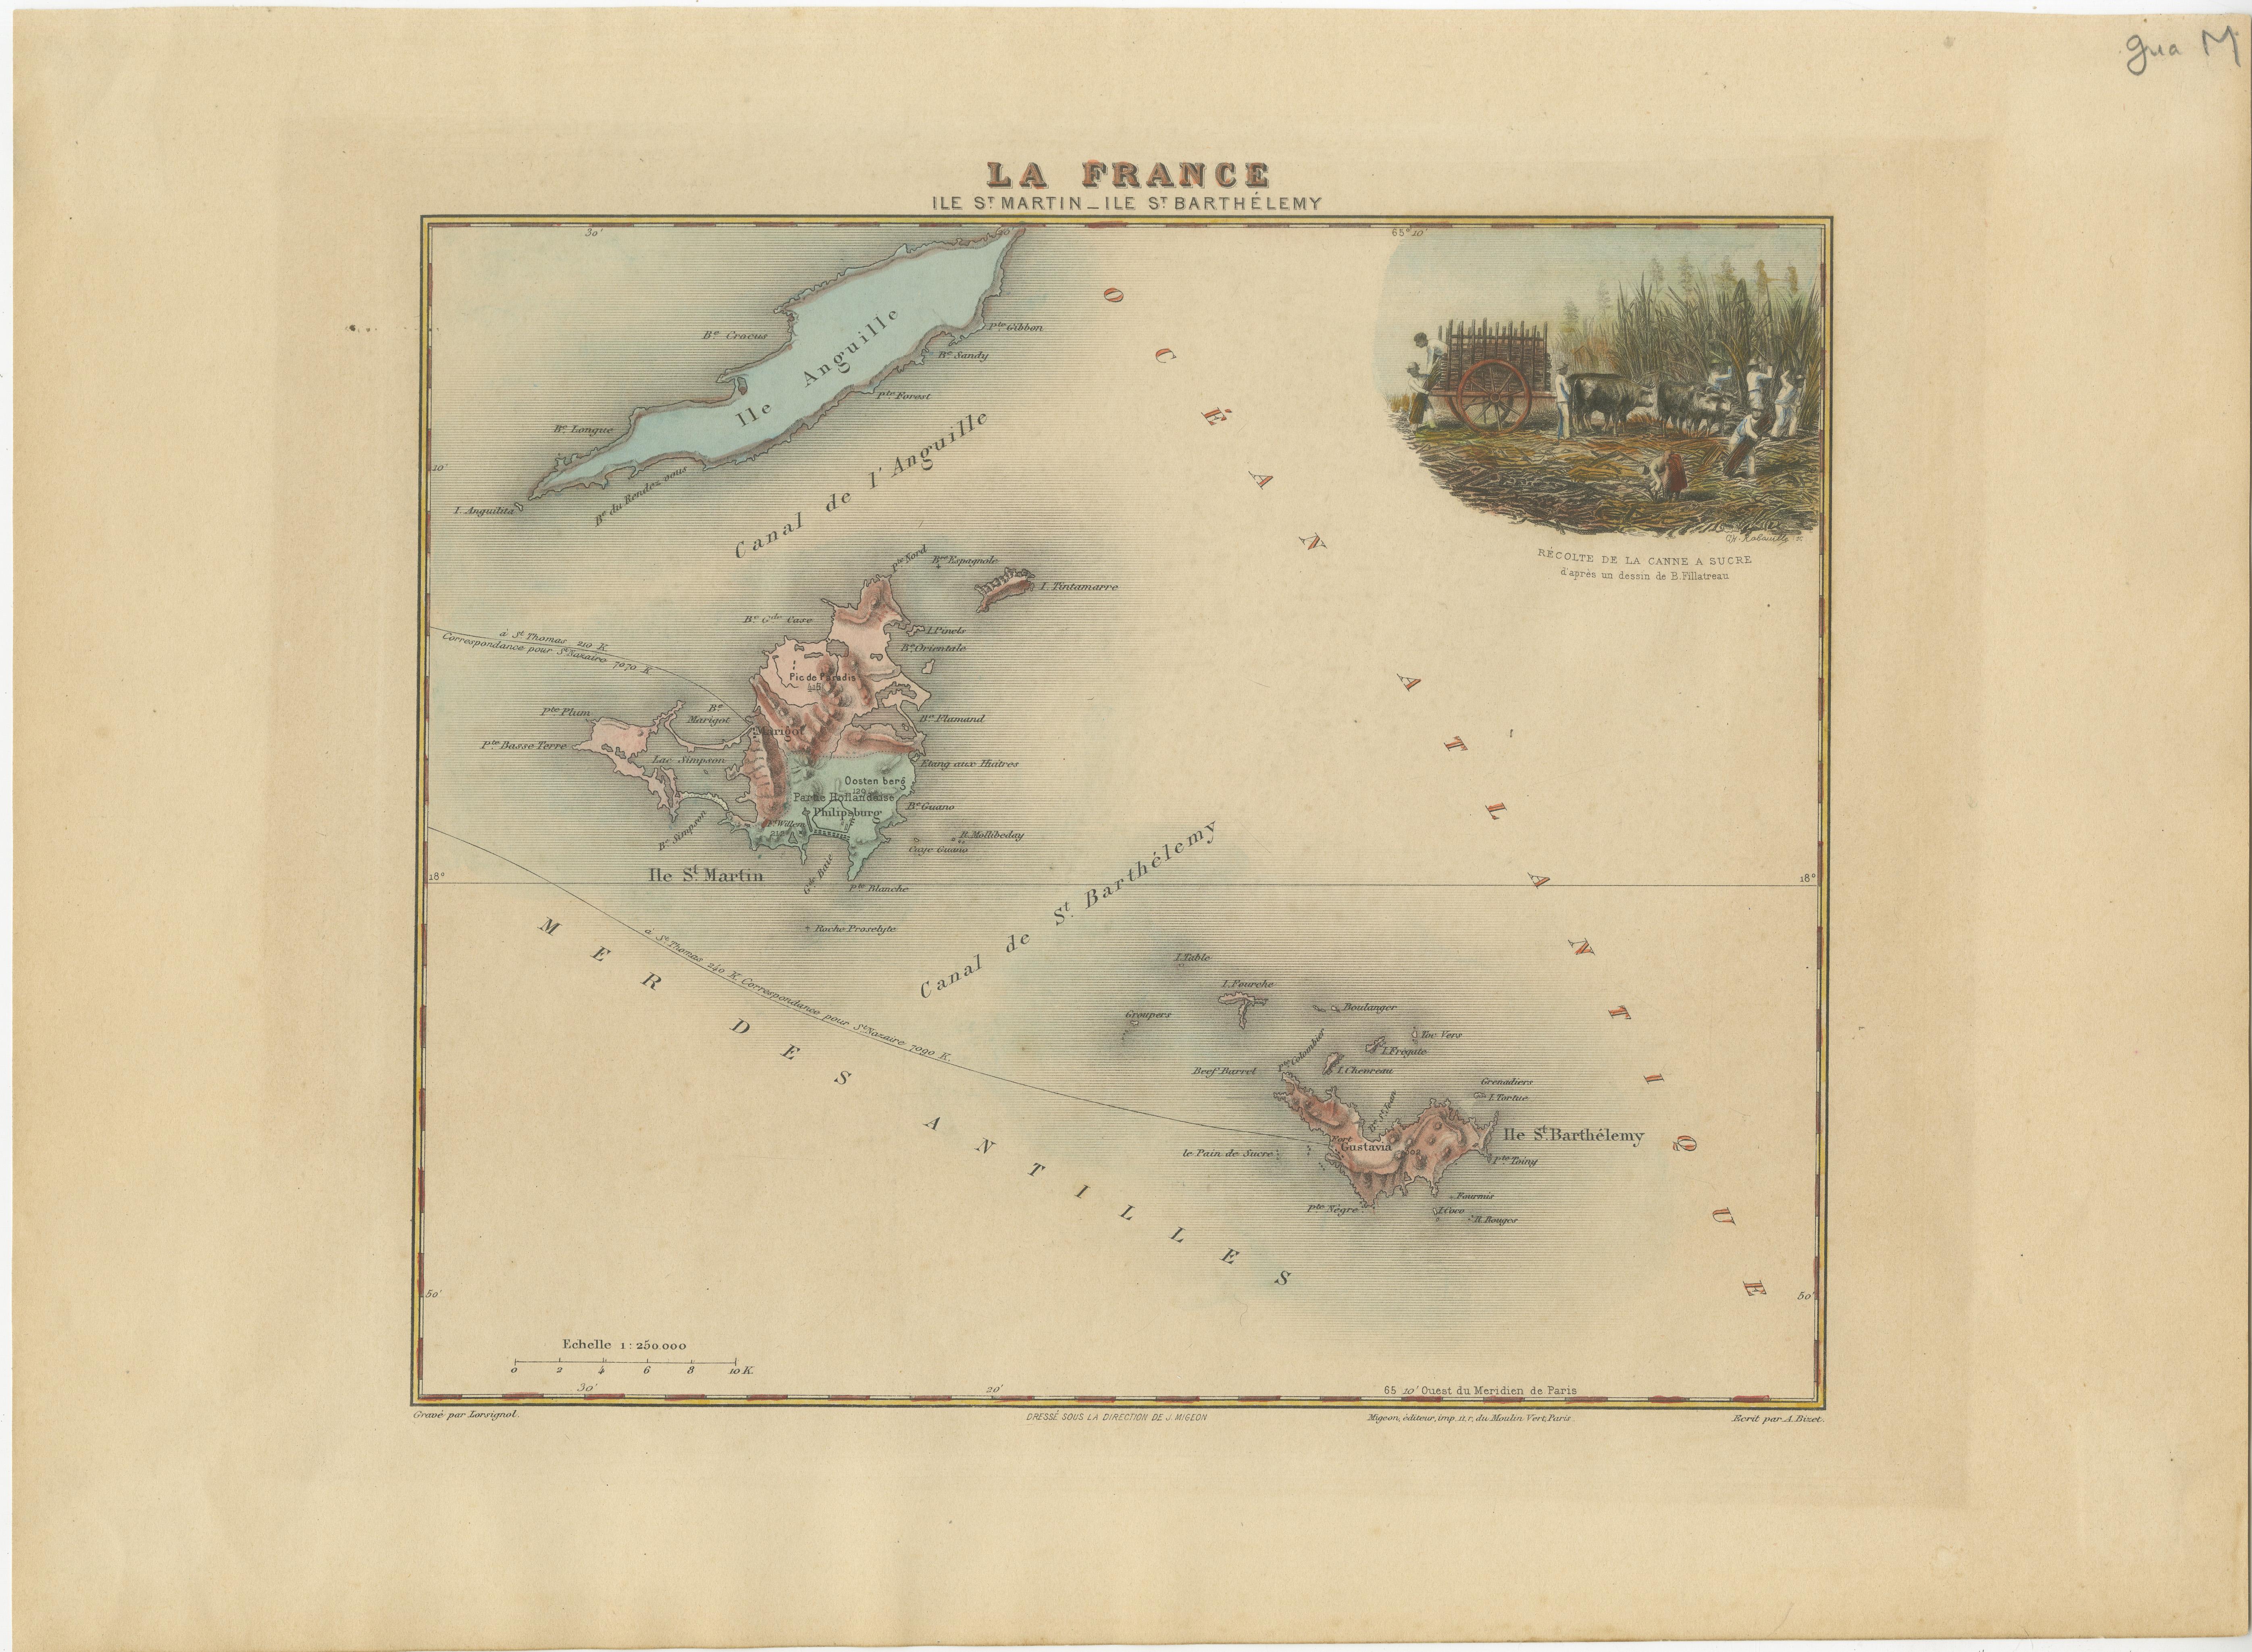 The circa 1890 map of St. Barth's, St. Martin, and Anguilla, a rare French Colonial map published in Paris by Migeon, provides intricate detail and historical insight into these Caribbean islands during that period.

**Title:** Rare French Colonial